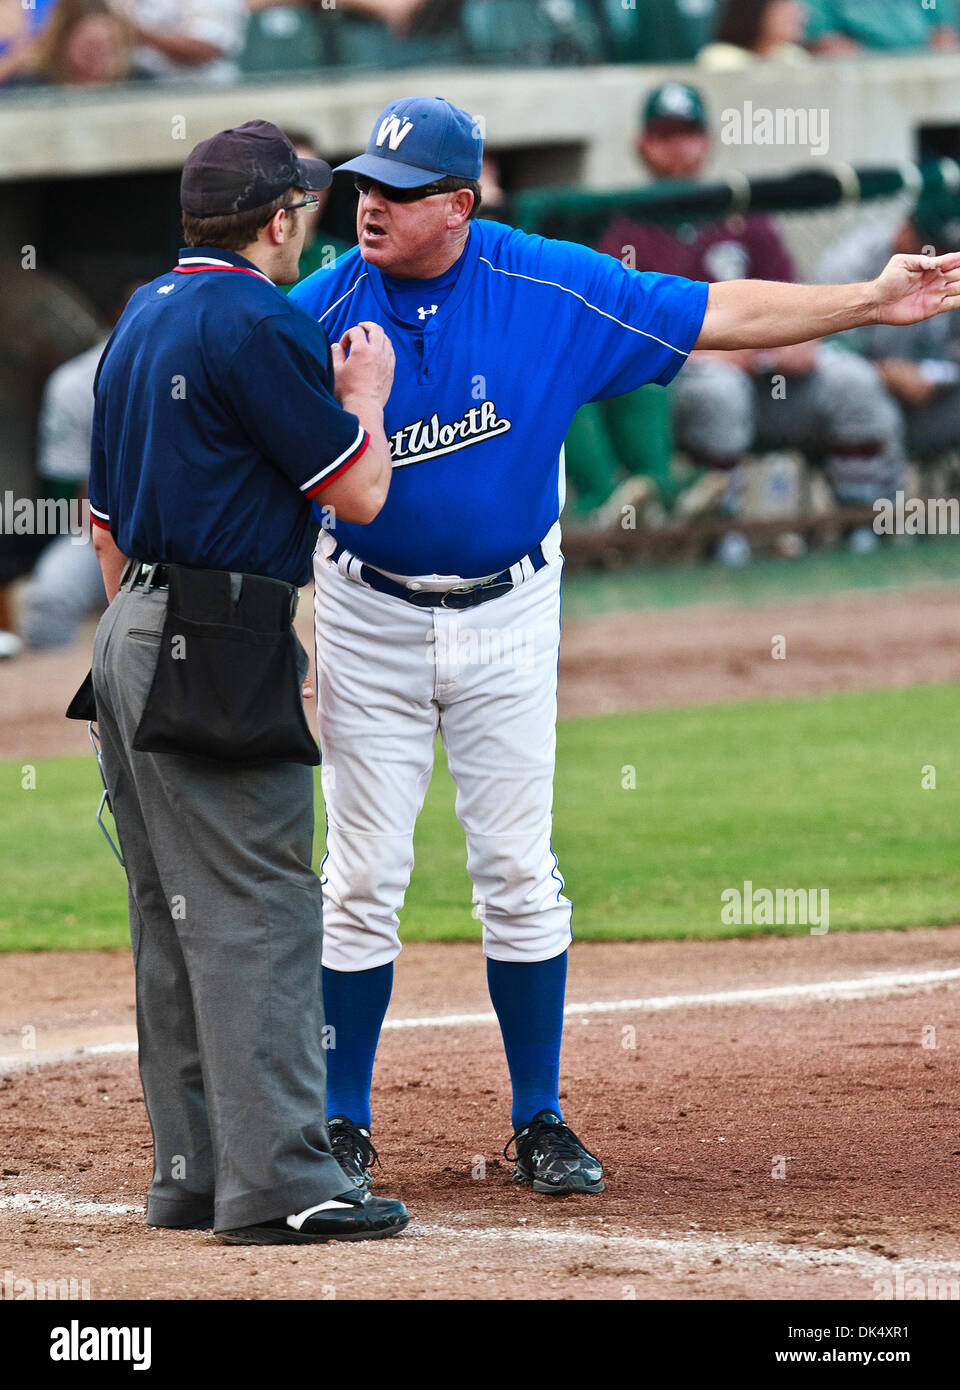 July 19, 2011 - Fort Worth, Texas, U.S - The Fort Worth Cats Manager, Stan Hough, shows his displeasure about a call with the home plate umpire, Shaylor Smith, during the American Association of Independant Professional Baseball game between the Gary Southshore Railcats and the Fort Worth Cats at the historic LaGrave Baseball Field in Fort Worth, Tx. Gary Southshore defeats Fort Wo Stock Photo